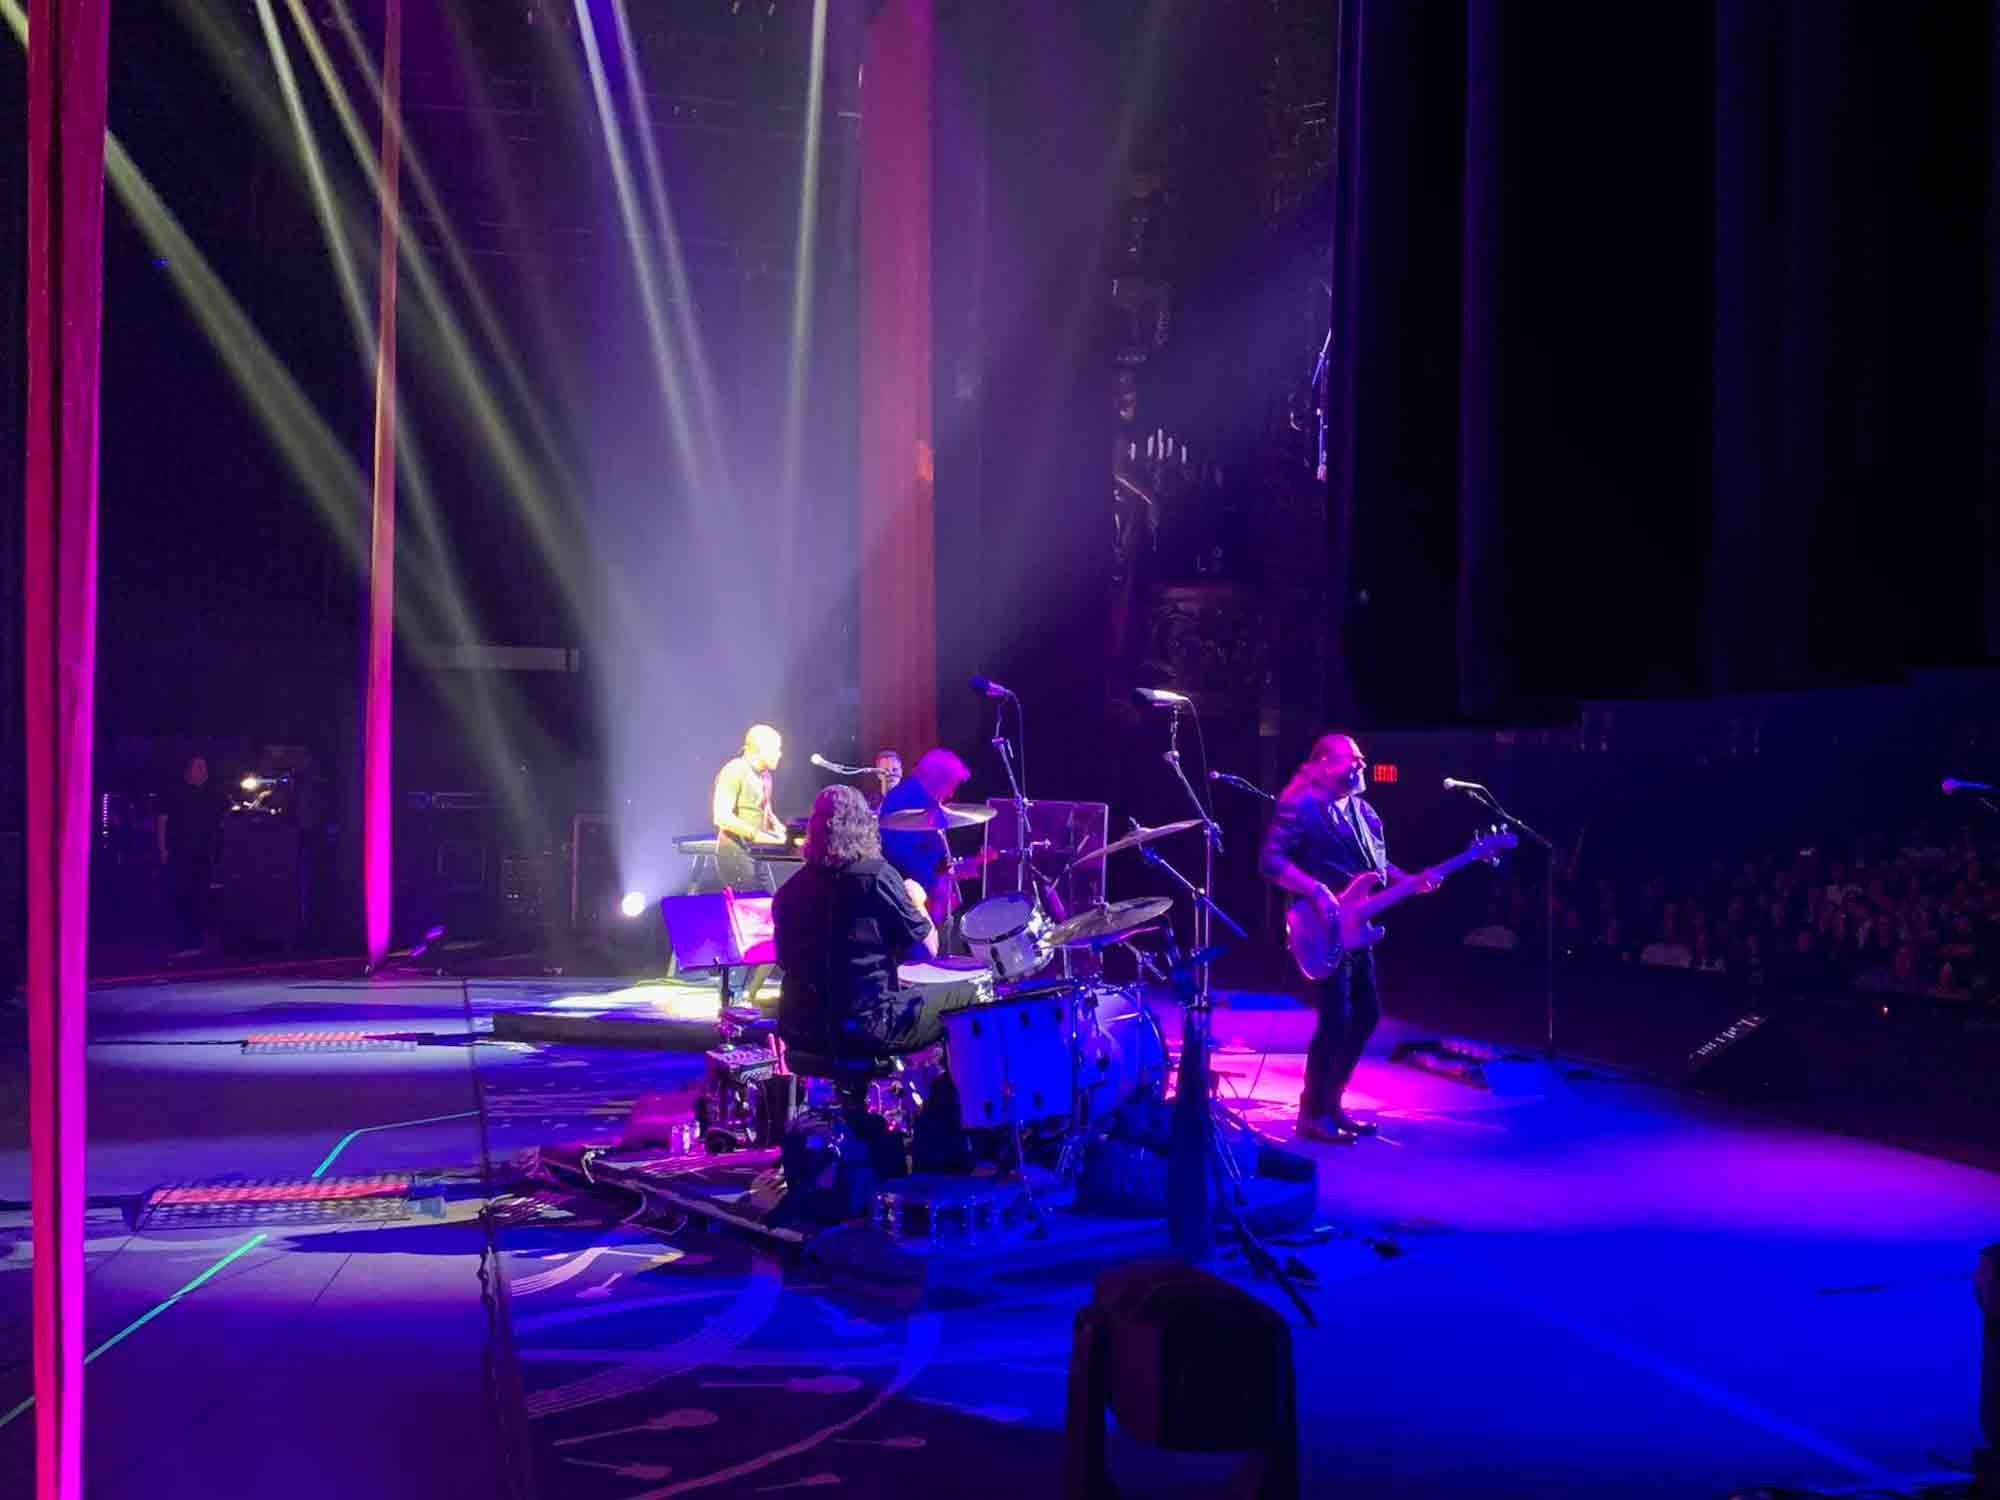 Steve Miller Band at the Venetian - A view from stage right (L-R Joseph Wooten, Ron Wikso, Jacob Petersen, Steve Miller, Kenny Lee Lewis)